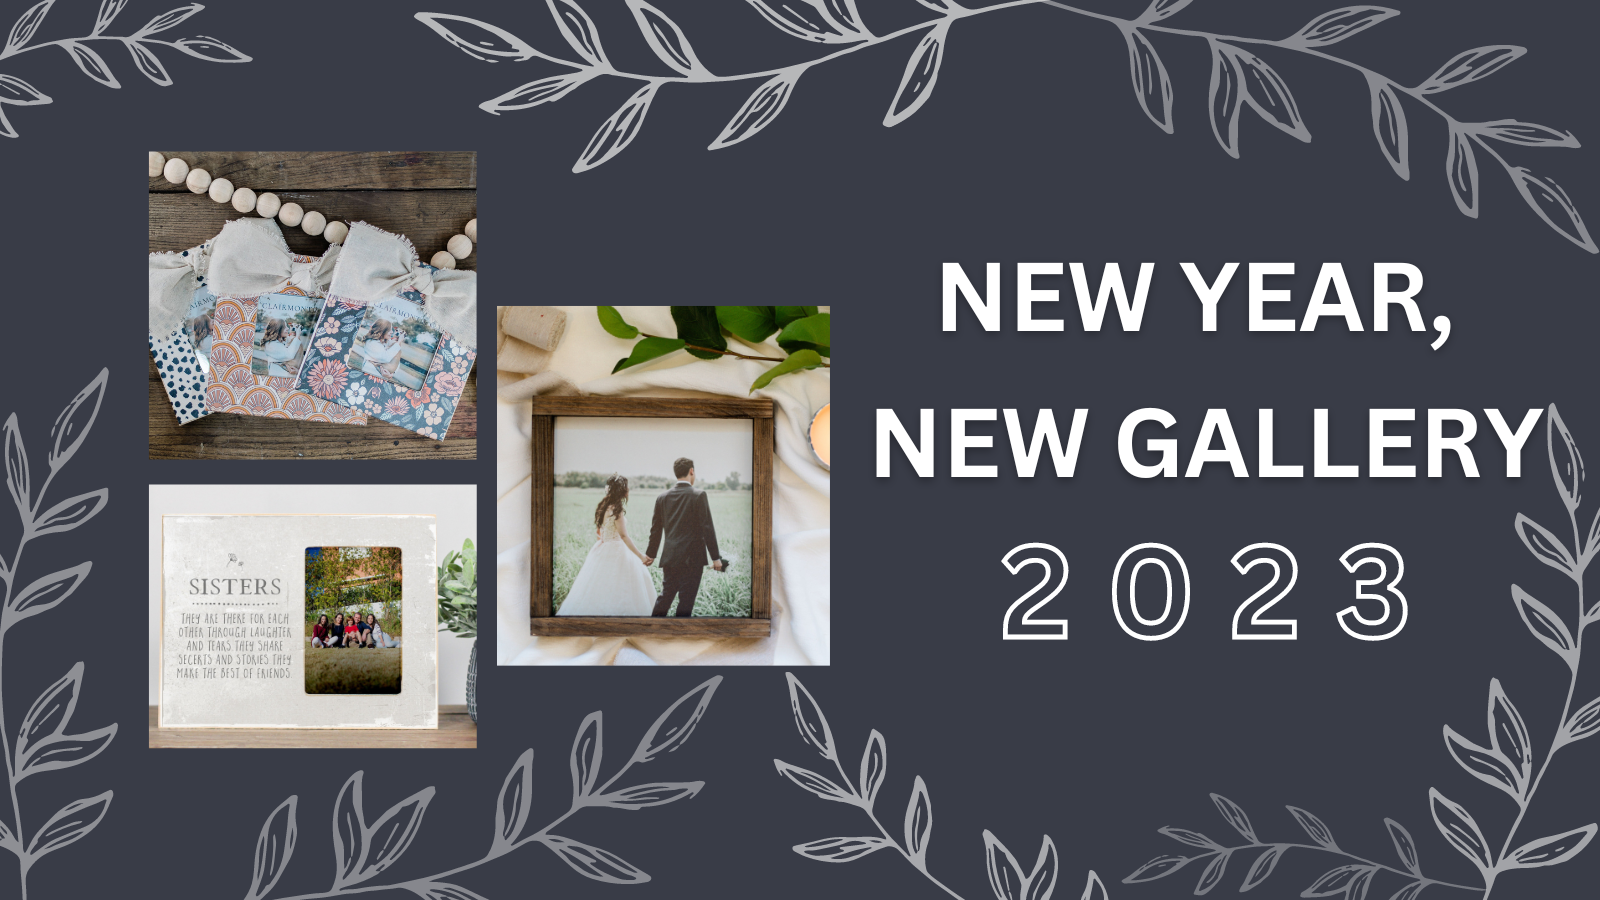 New Year, New Gallery to Welcome 2023 - Personalized and Wooden Home Decor | The Warehouse Studio